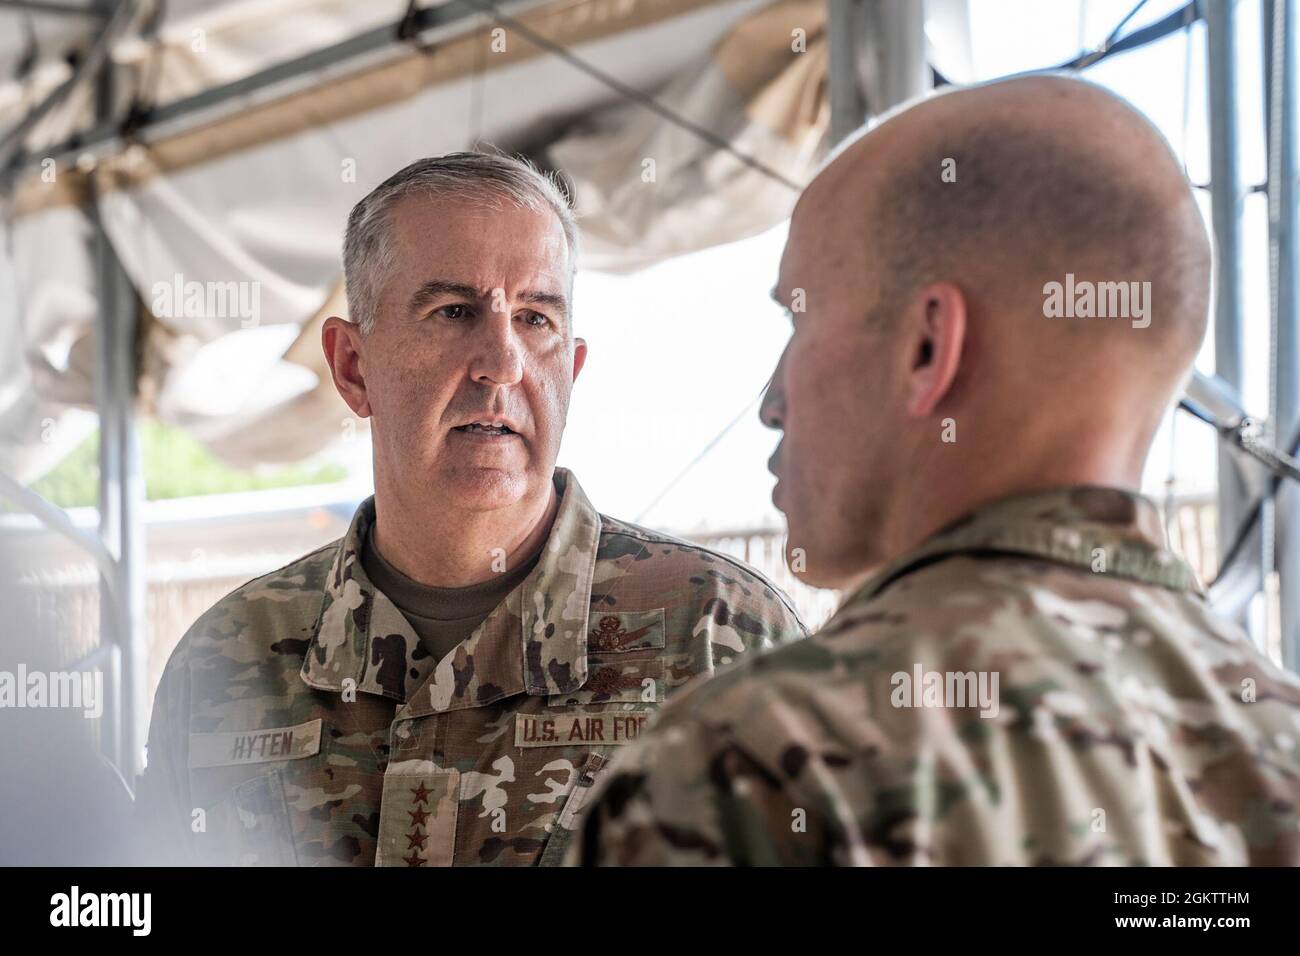 U.S. Air Force Col. Mason Dula, Special Warfare Training Wing commander briefs Gen. John. E. Hyten, vice chairmen of the Joint Chiefs of Staff, on the Special Warfare preparatory class during the 2021 U.S.O Tour at Joint Base San Antonio-Chapman Training Annex, Texas Jul. 1, 2021. Stock Photo